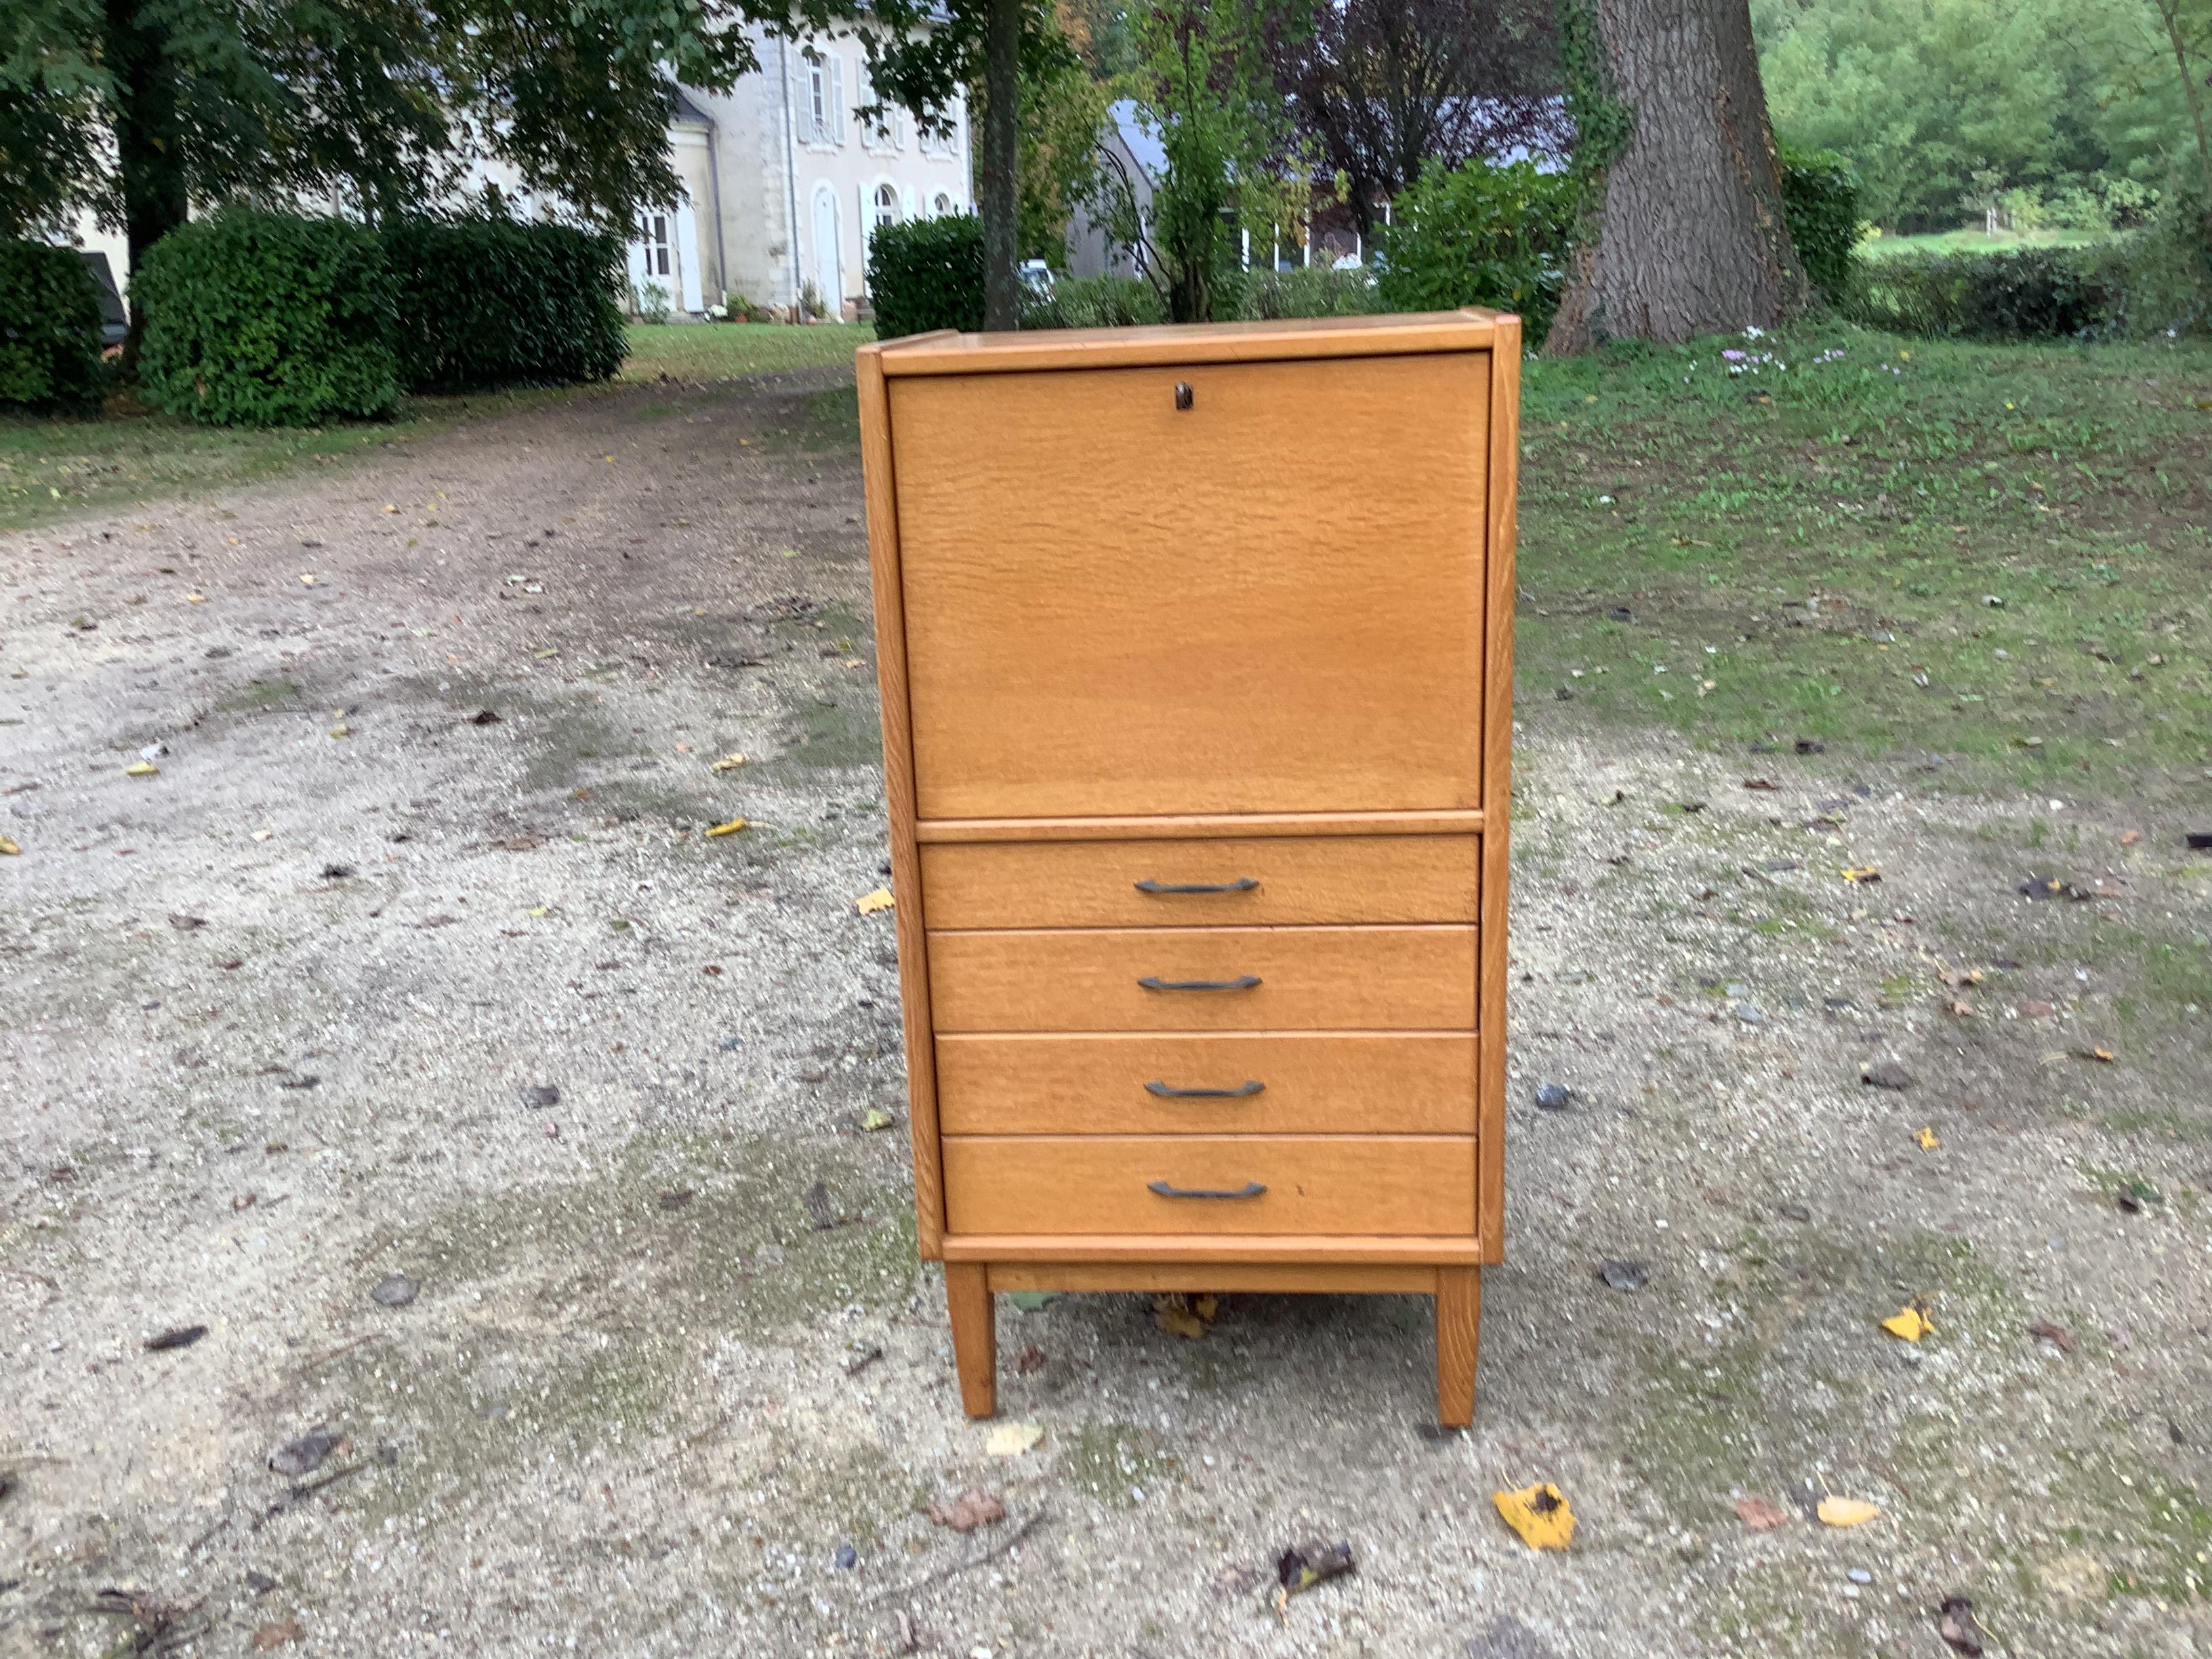 Simple functional Bureau with excellent storage draws finished in light oak
Cc 1960.